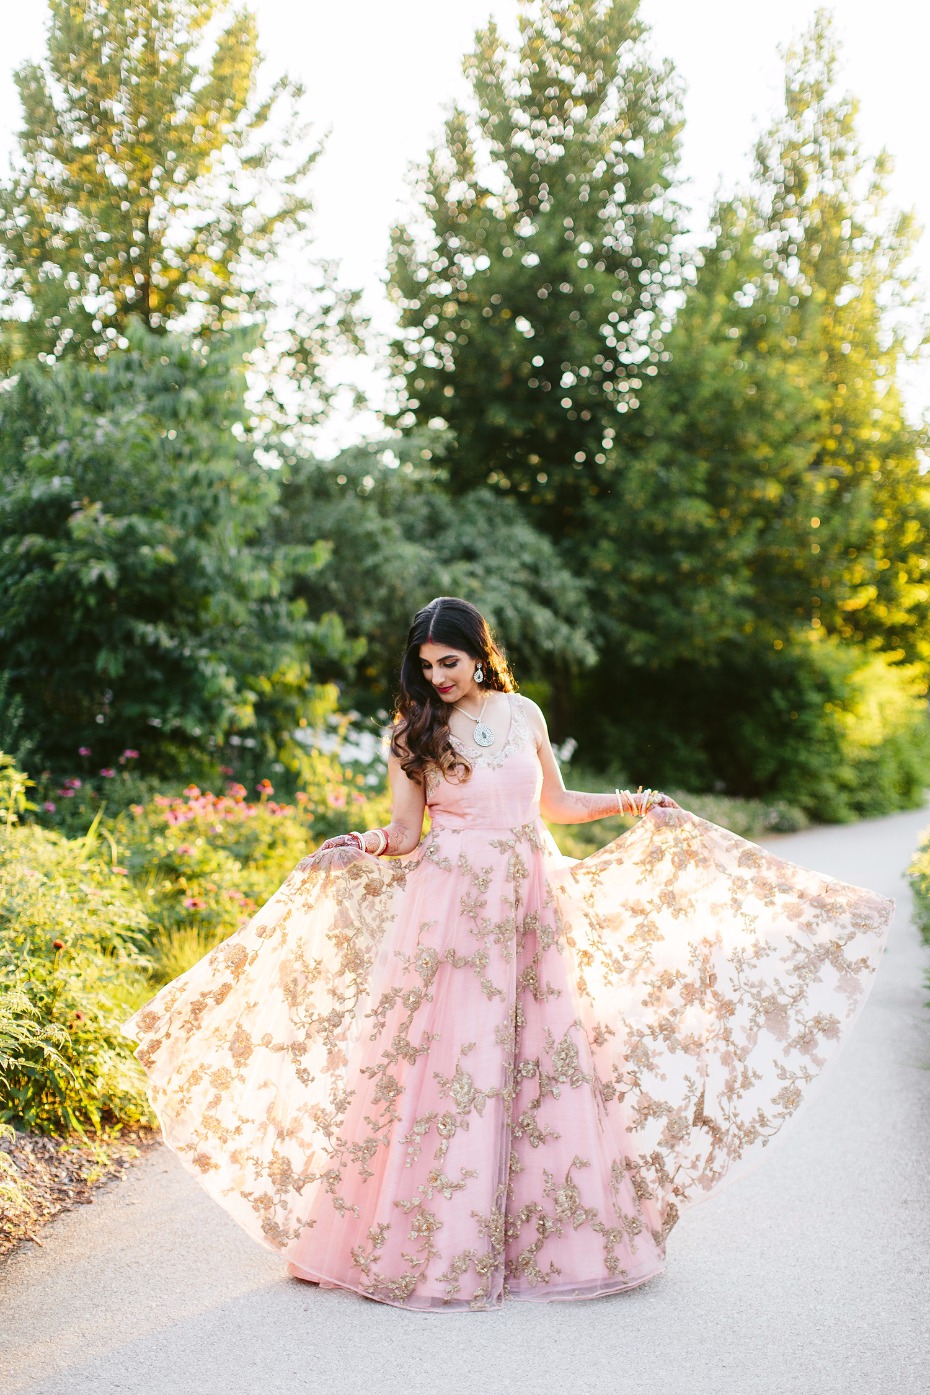 Shyamal & Bhumika reception gown in blush and gold